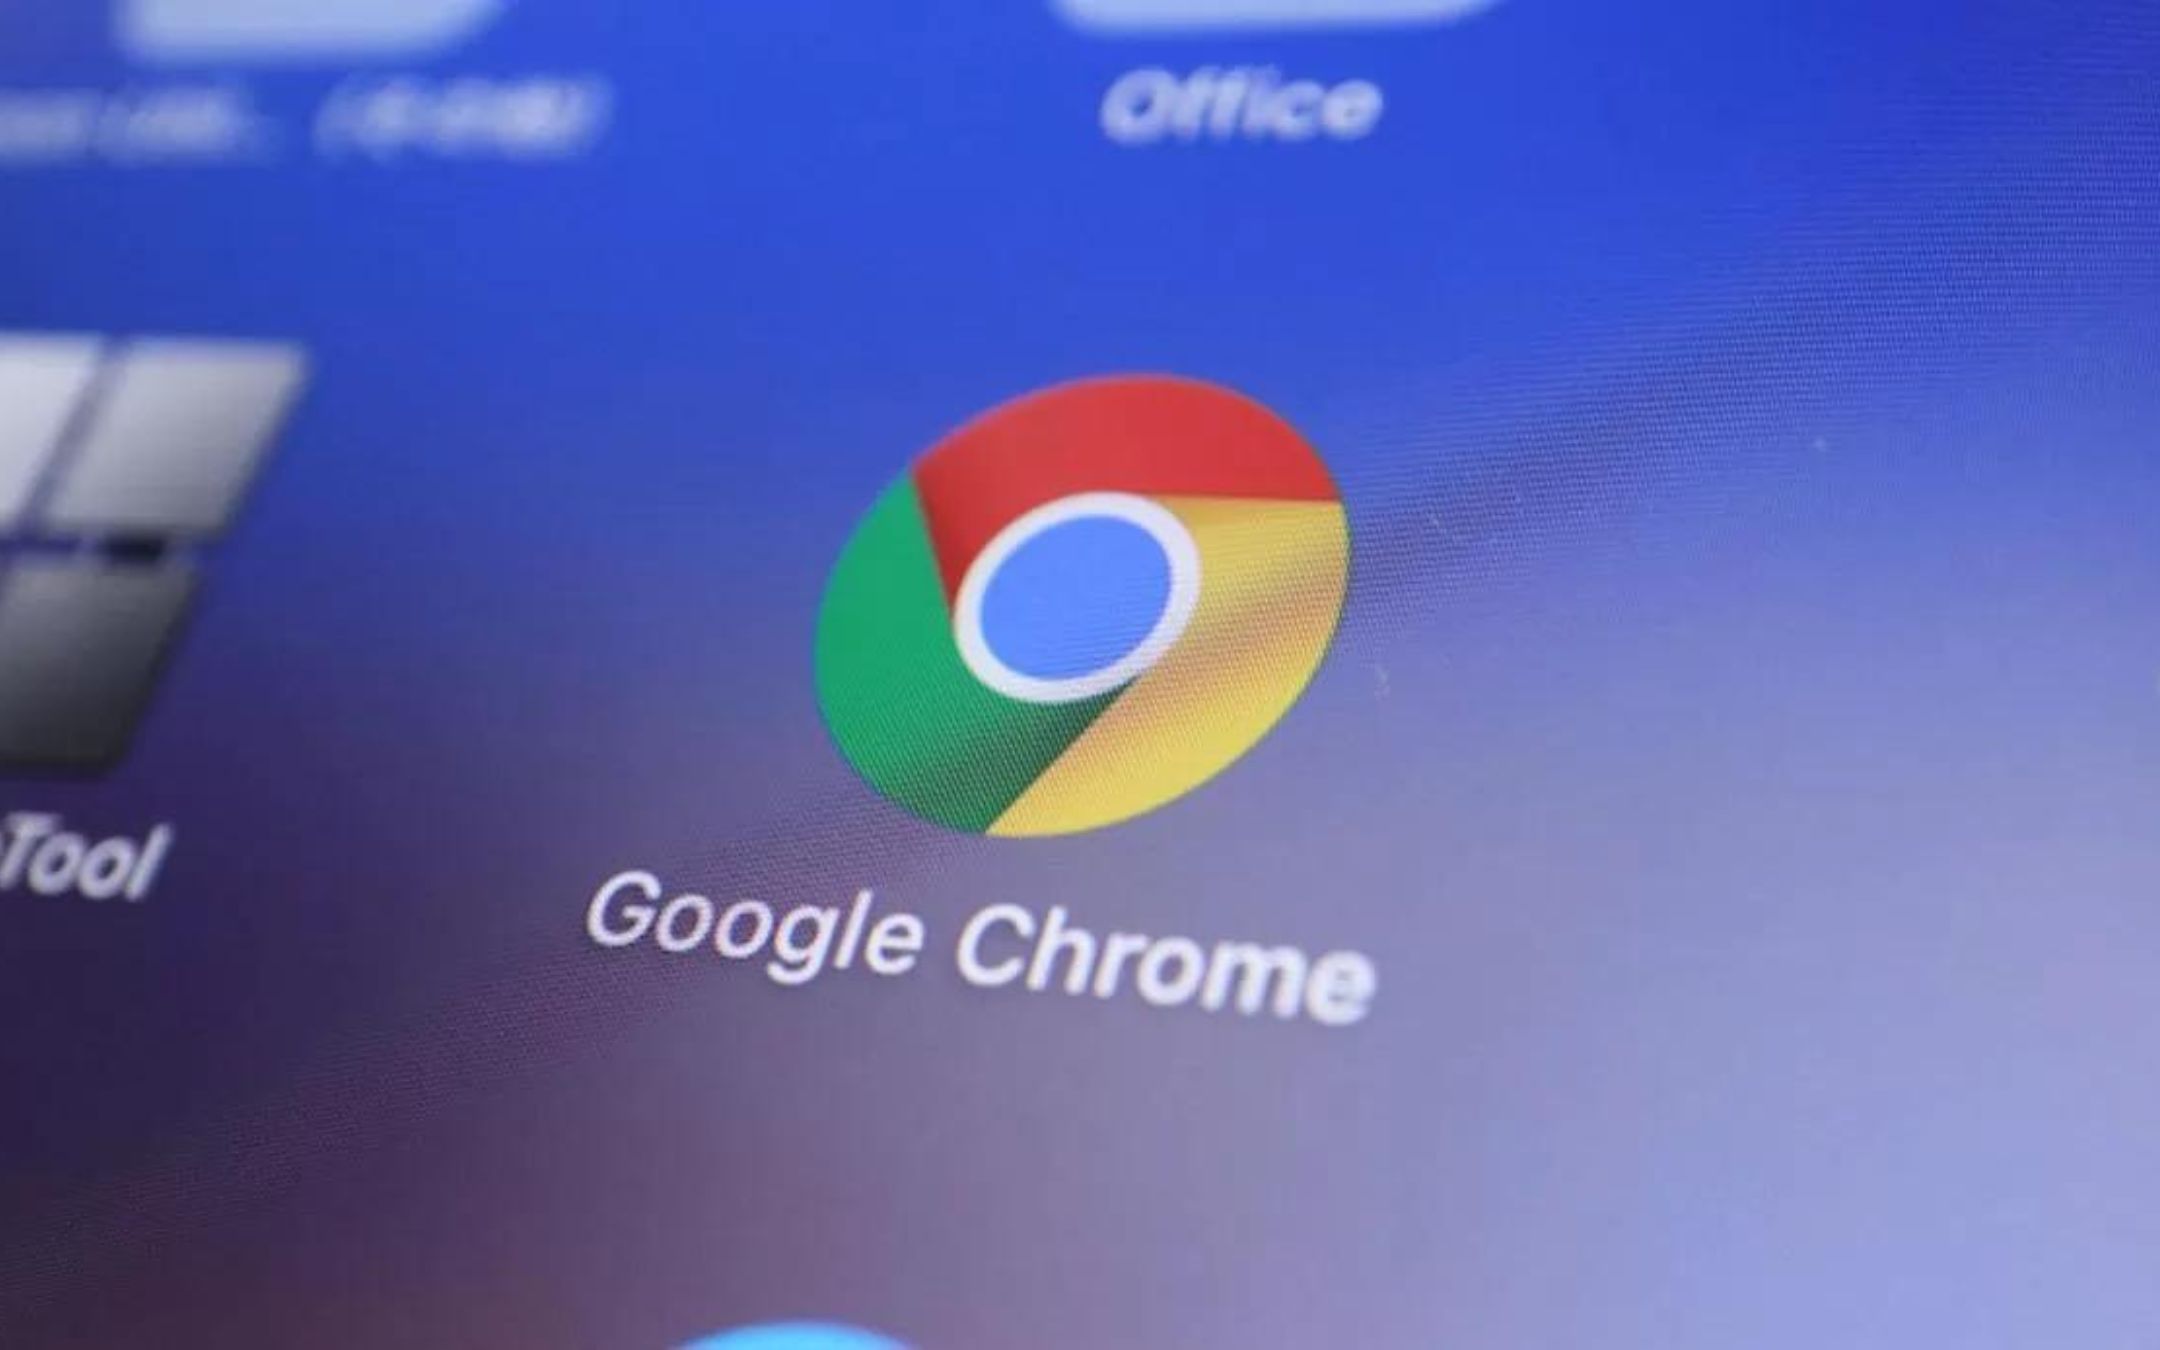 Google Chrome will be able to read PDF files with OCR technology